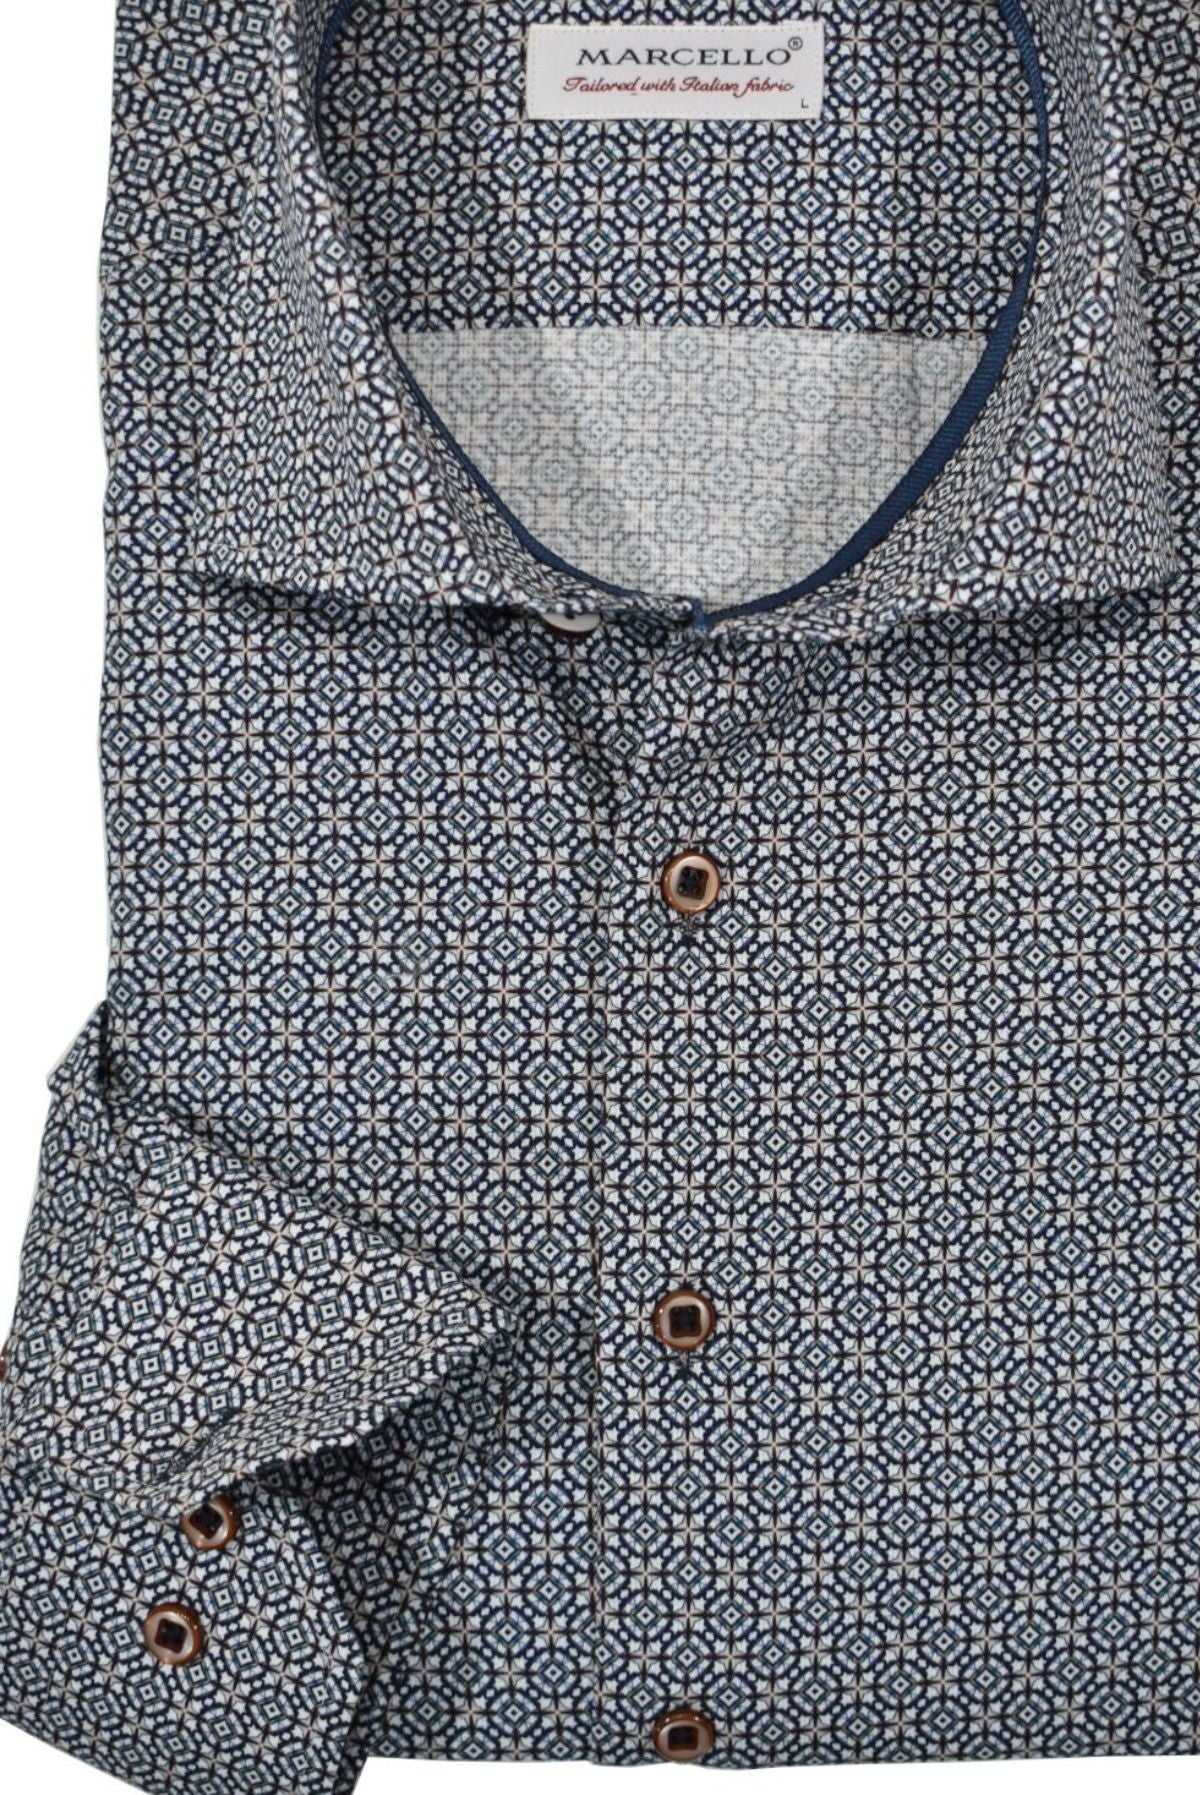 The first impression is the right one! The exclusively rich medallion pattern boasts a mixed medallion on a white ground with regal royal, navy and tan accents colors. An exceptionally rich pattern to foster a debonair image when paired with many colored bottoms.  The fabric is soft to the touch, consisting of cotton with a touch of lycra to provide diagonal stretch. The result is a luxurious feel with a little stretch for added comfort.